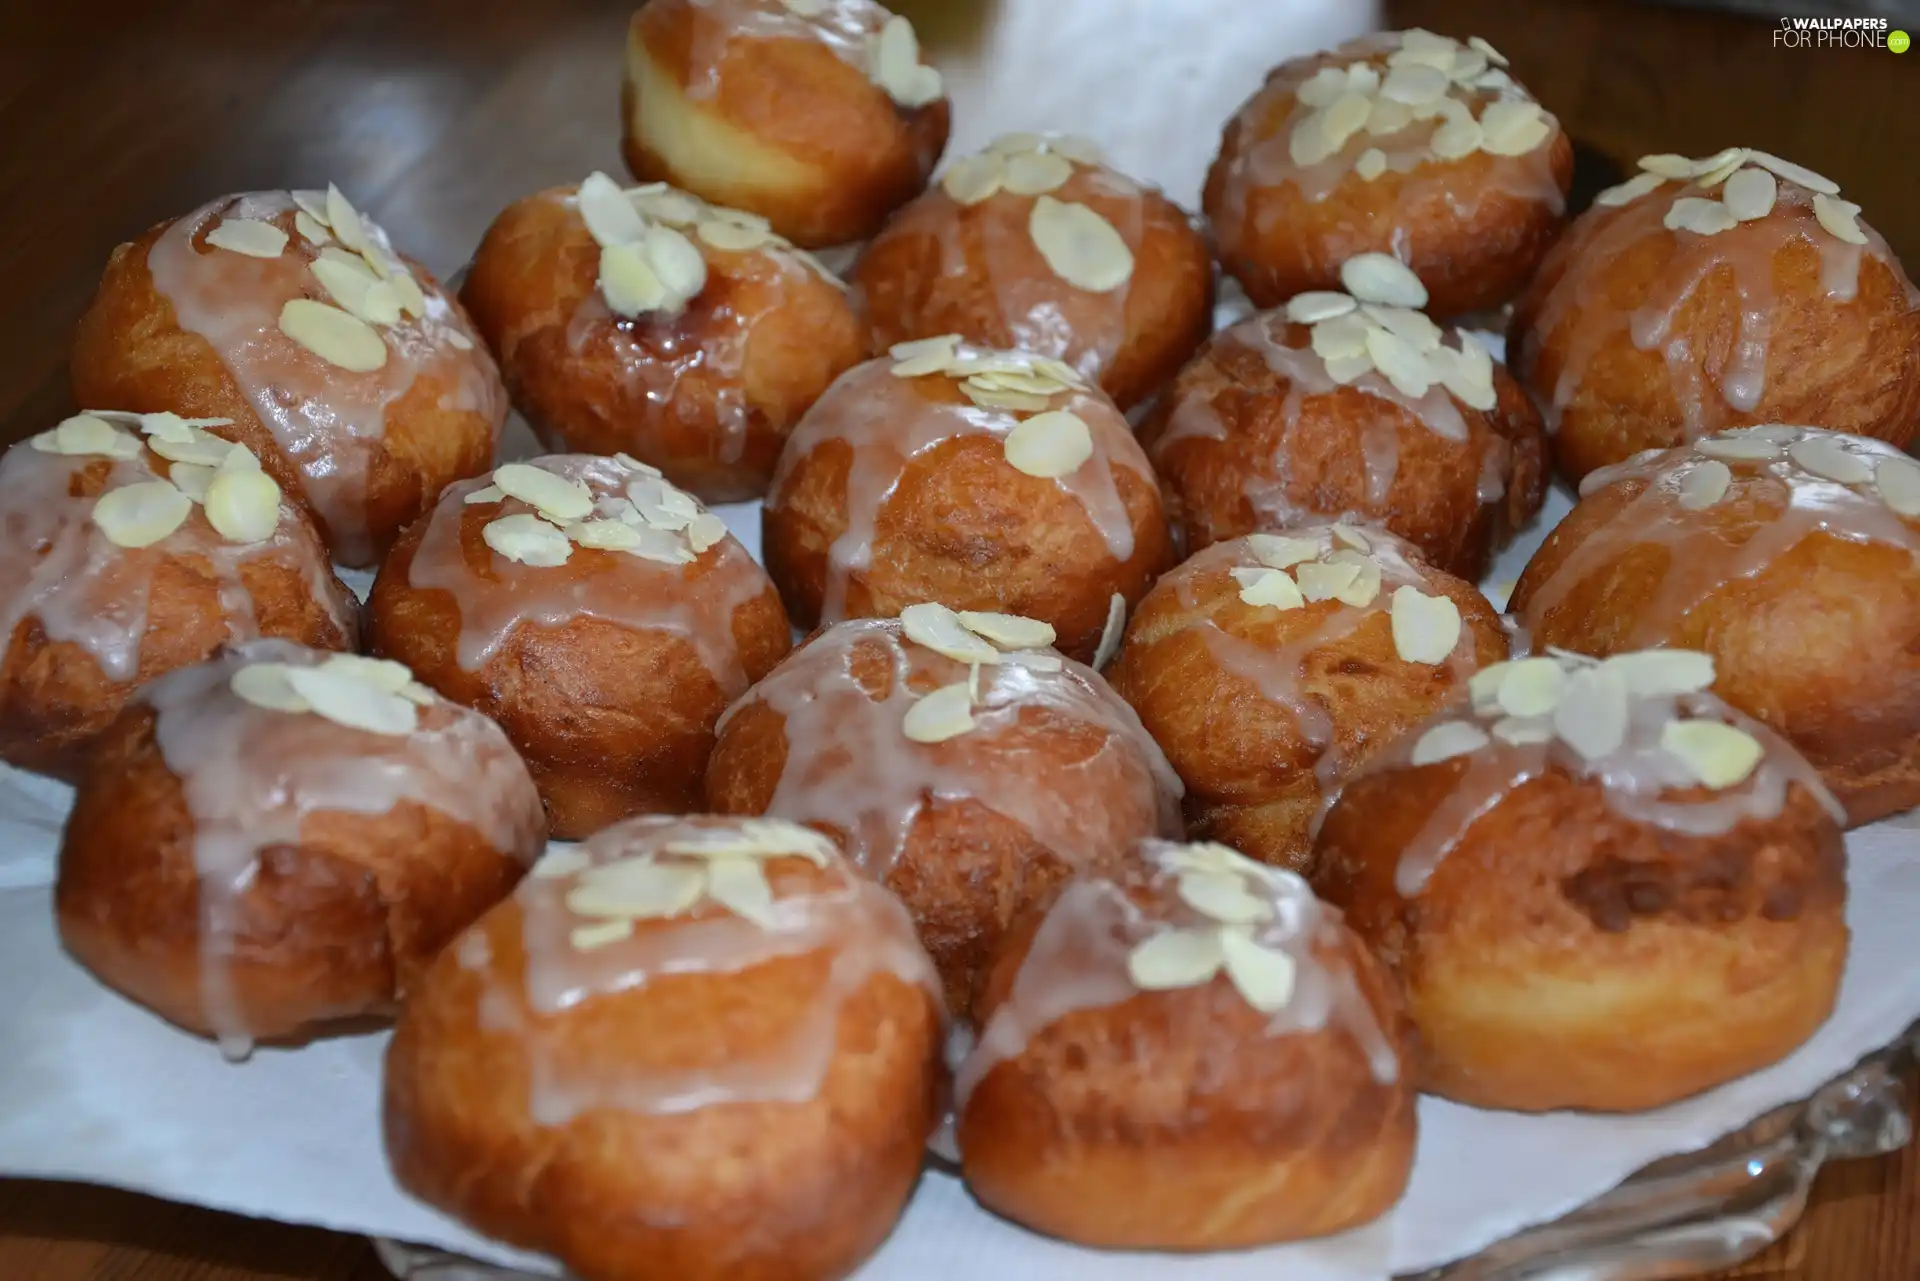 almonds, donuts, icing